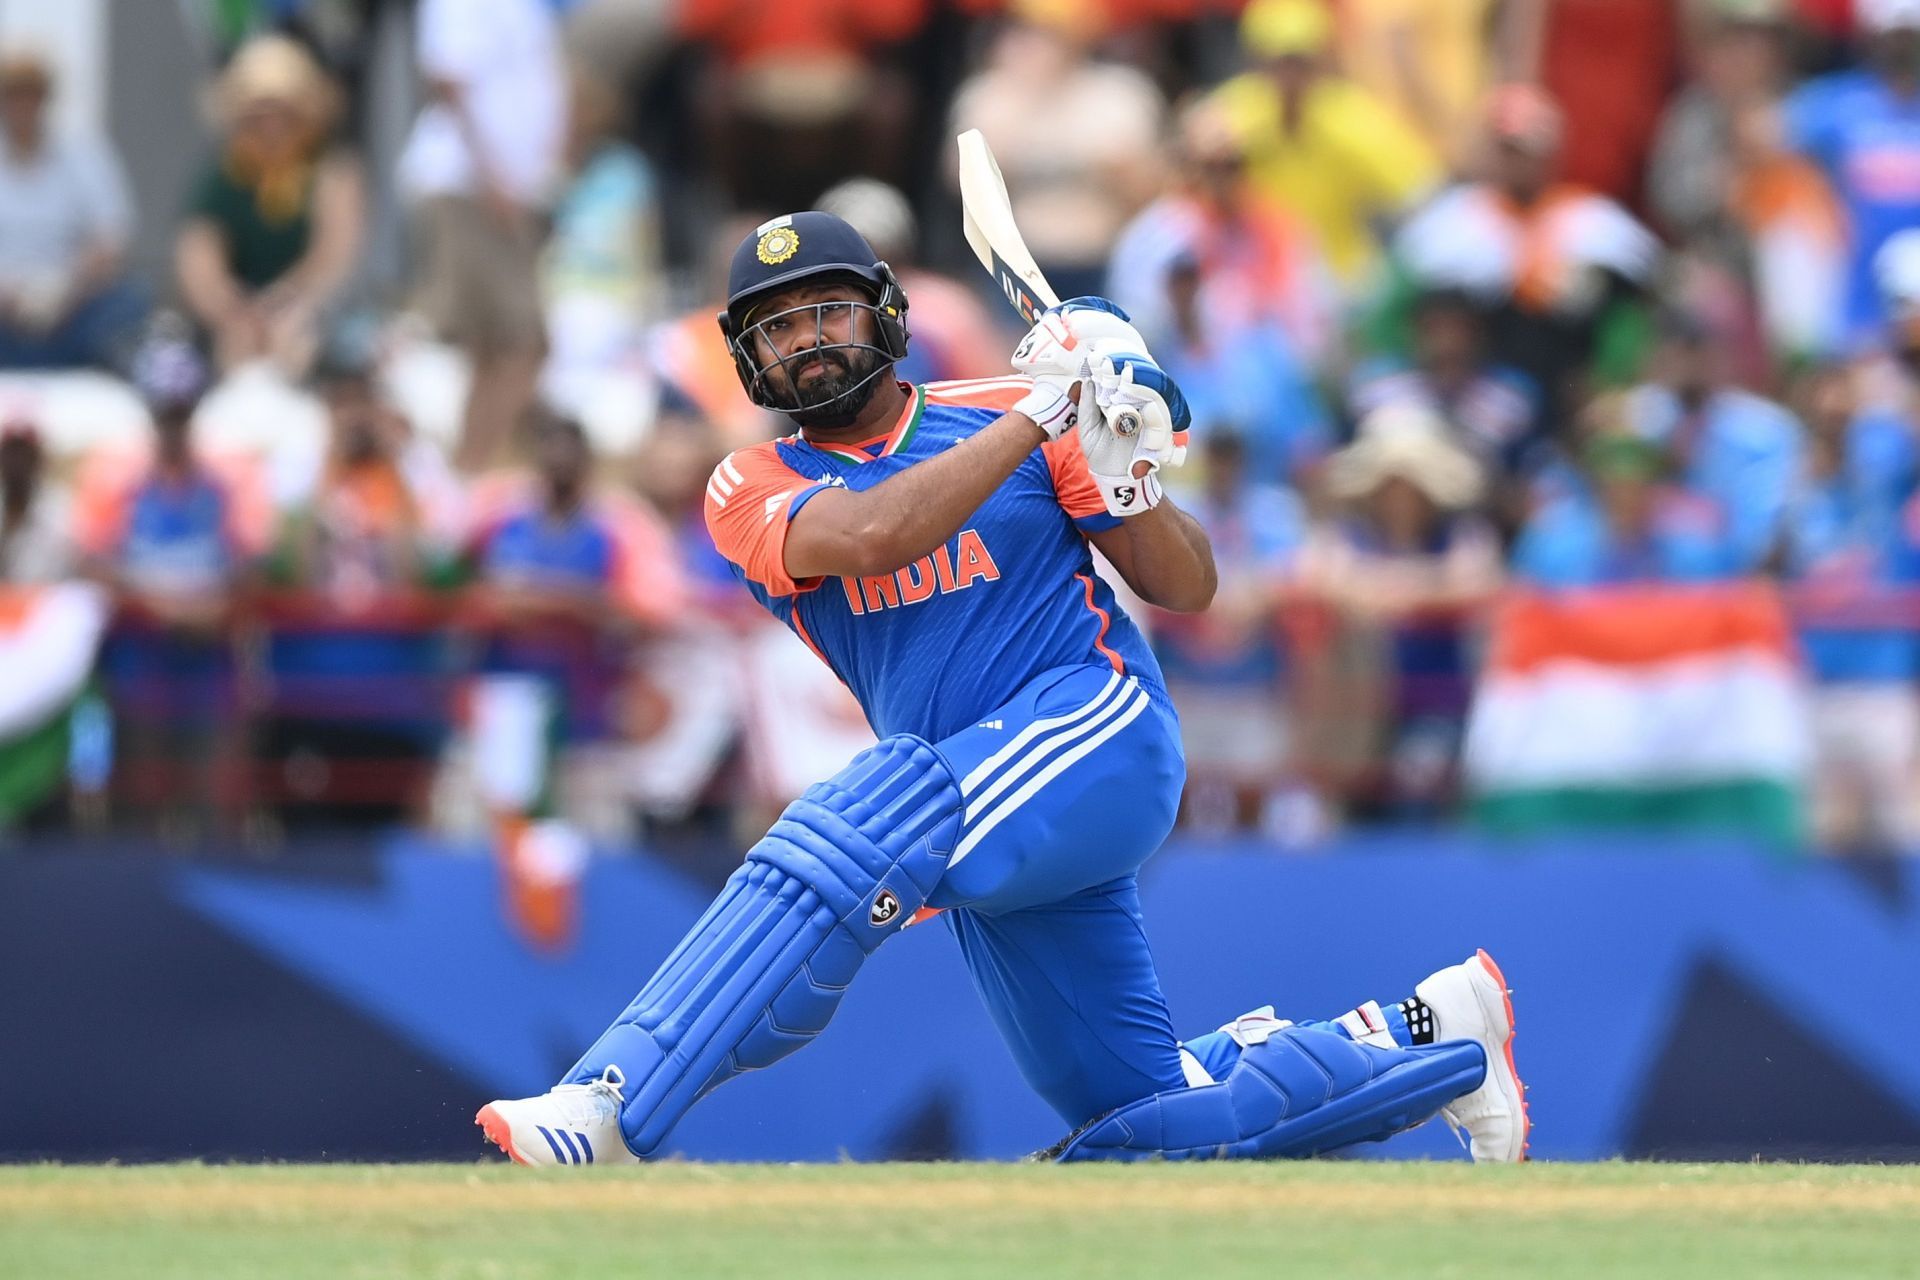 Rohit Sharma is the only player to have hit more than 200 T20I sixes.